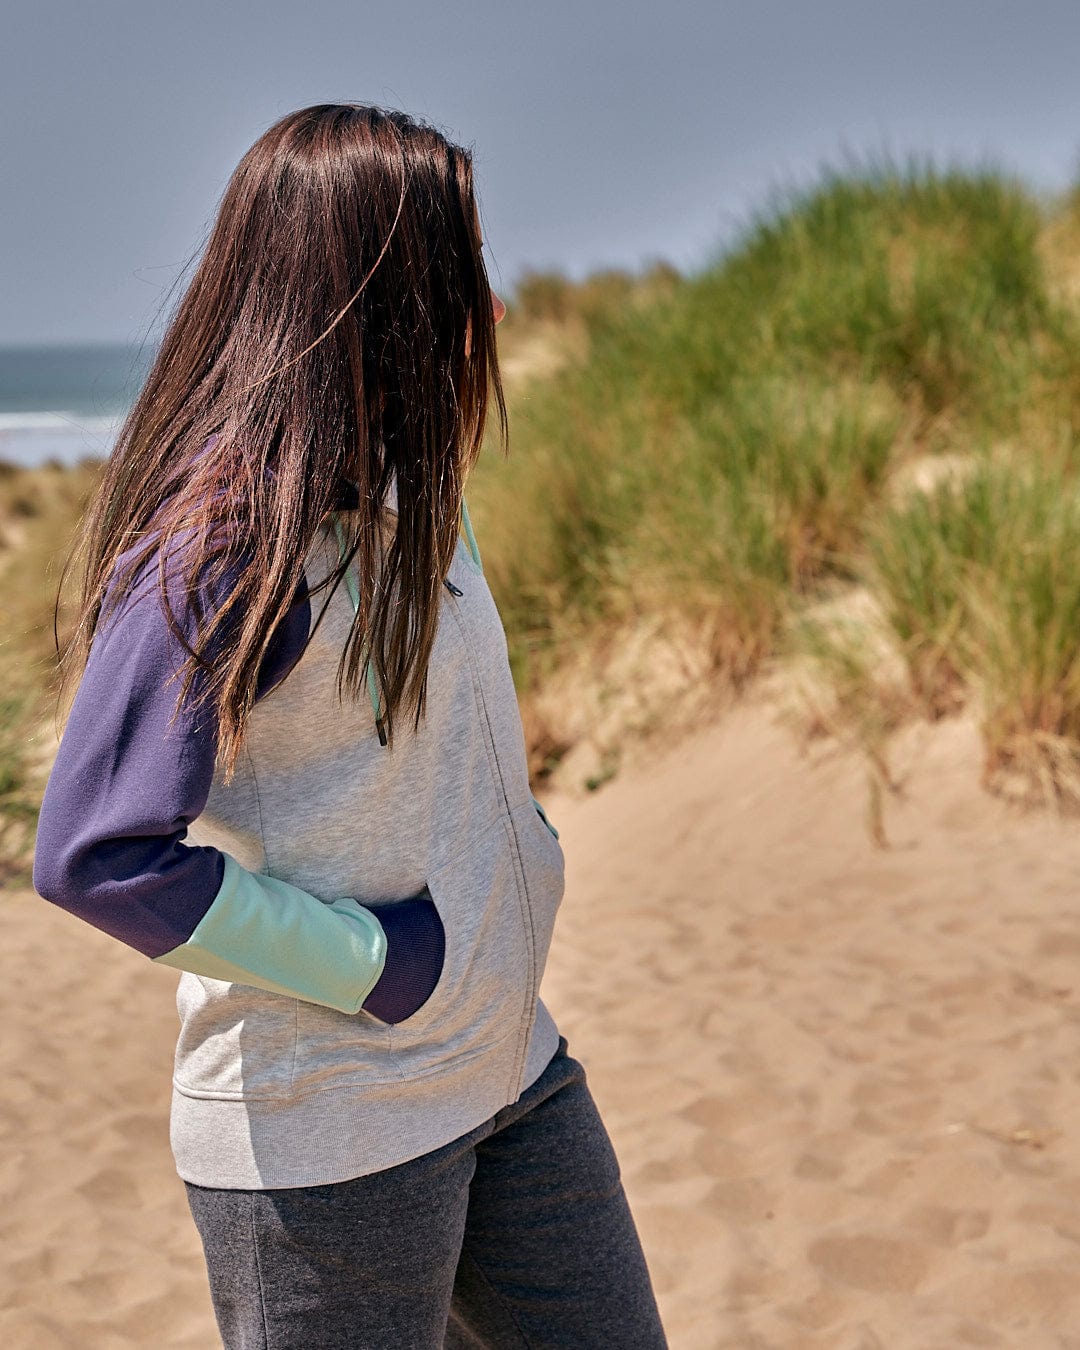 A woman standing on a sand dune effortlessly sporting a Jan - Womens Zip Hoodie - Grey, featuring the iconic Saltrock branding.